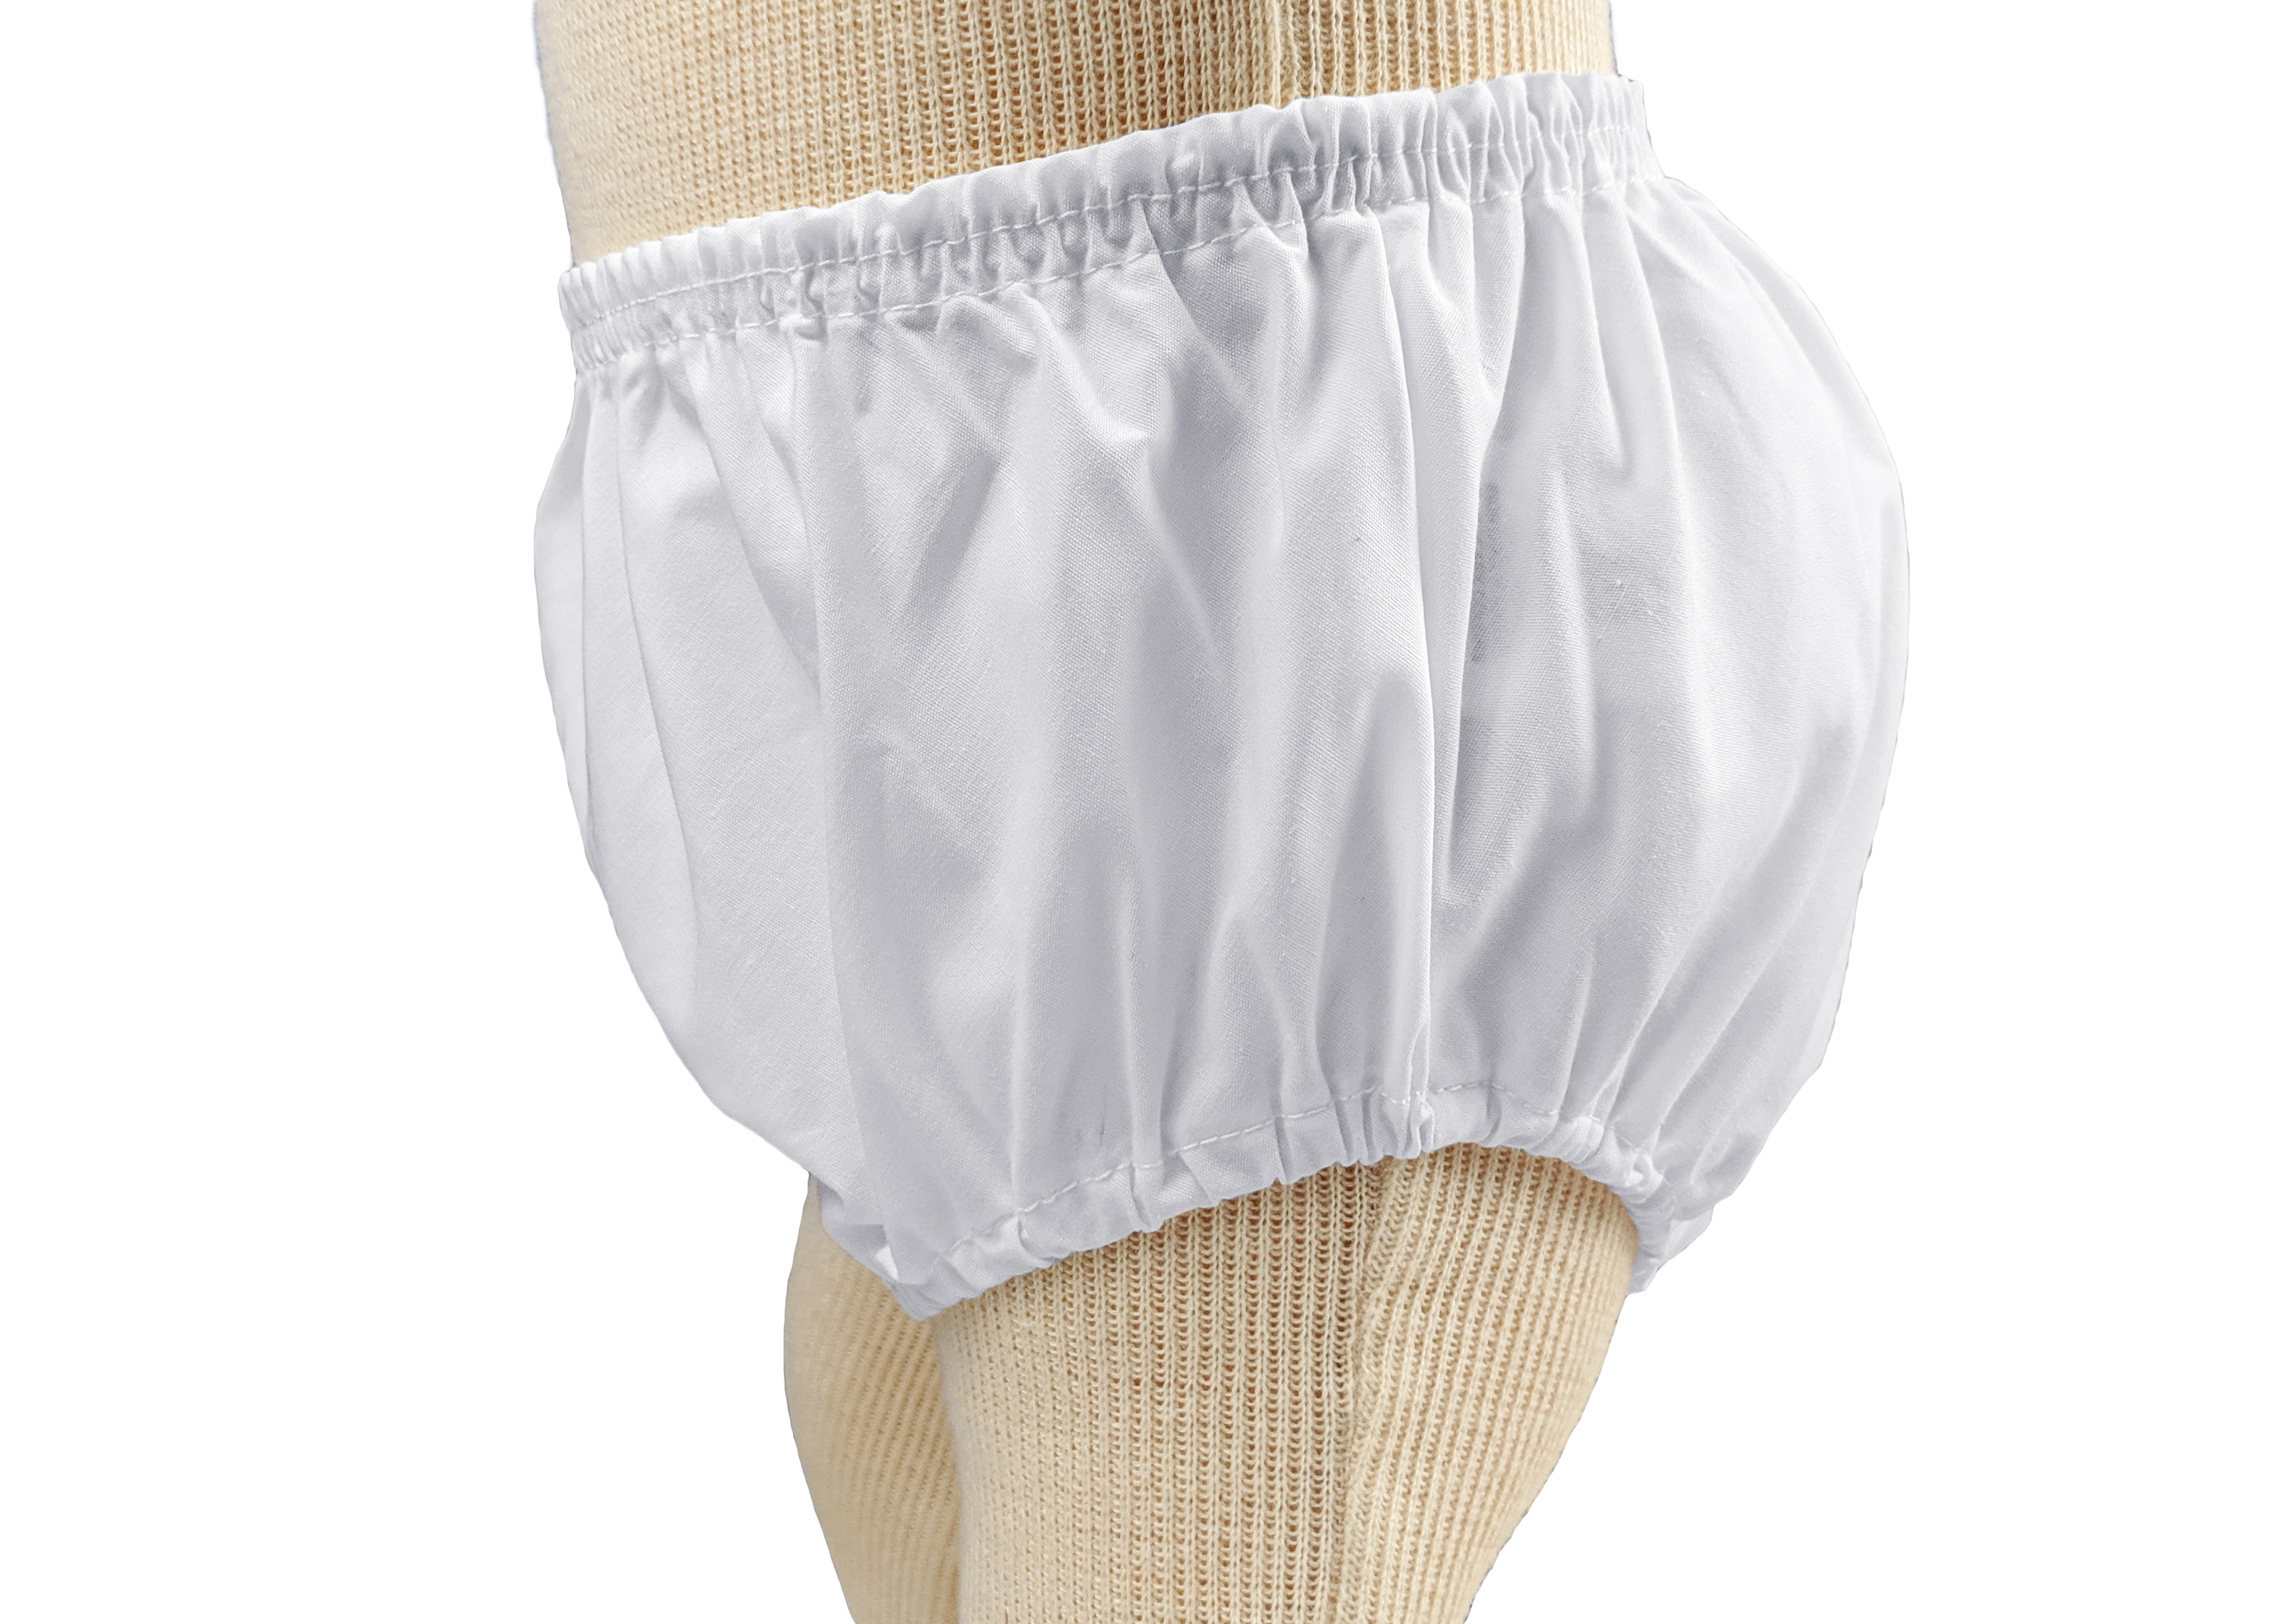 Baby Girls White Elastic Bloomer Diaper Cover - Little Things Mean a Lot